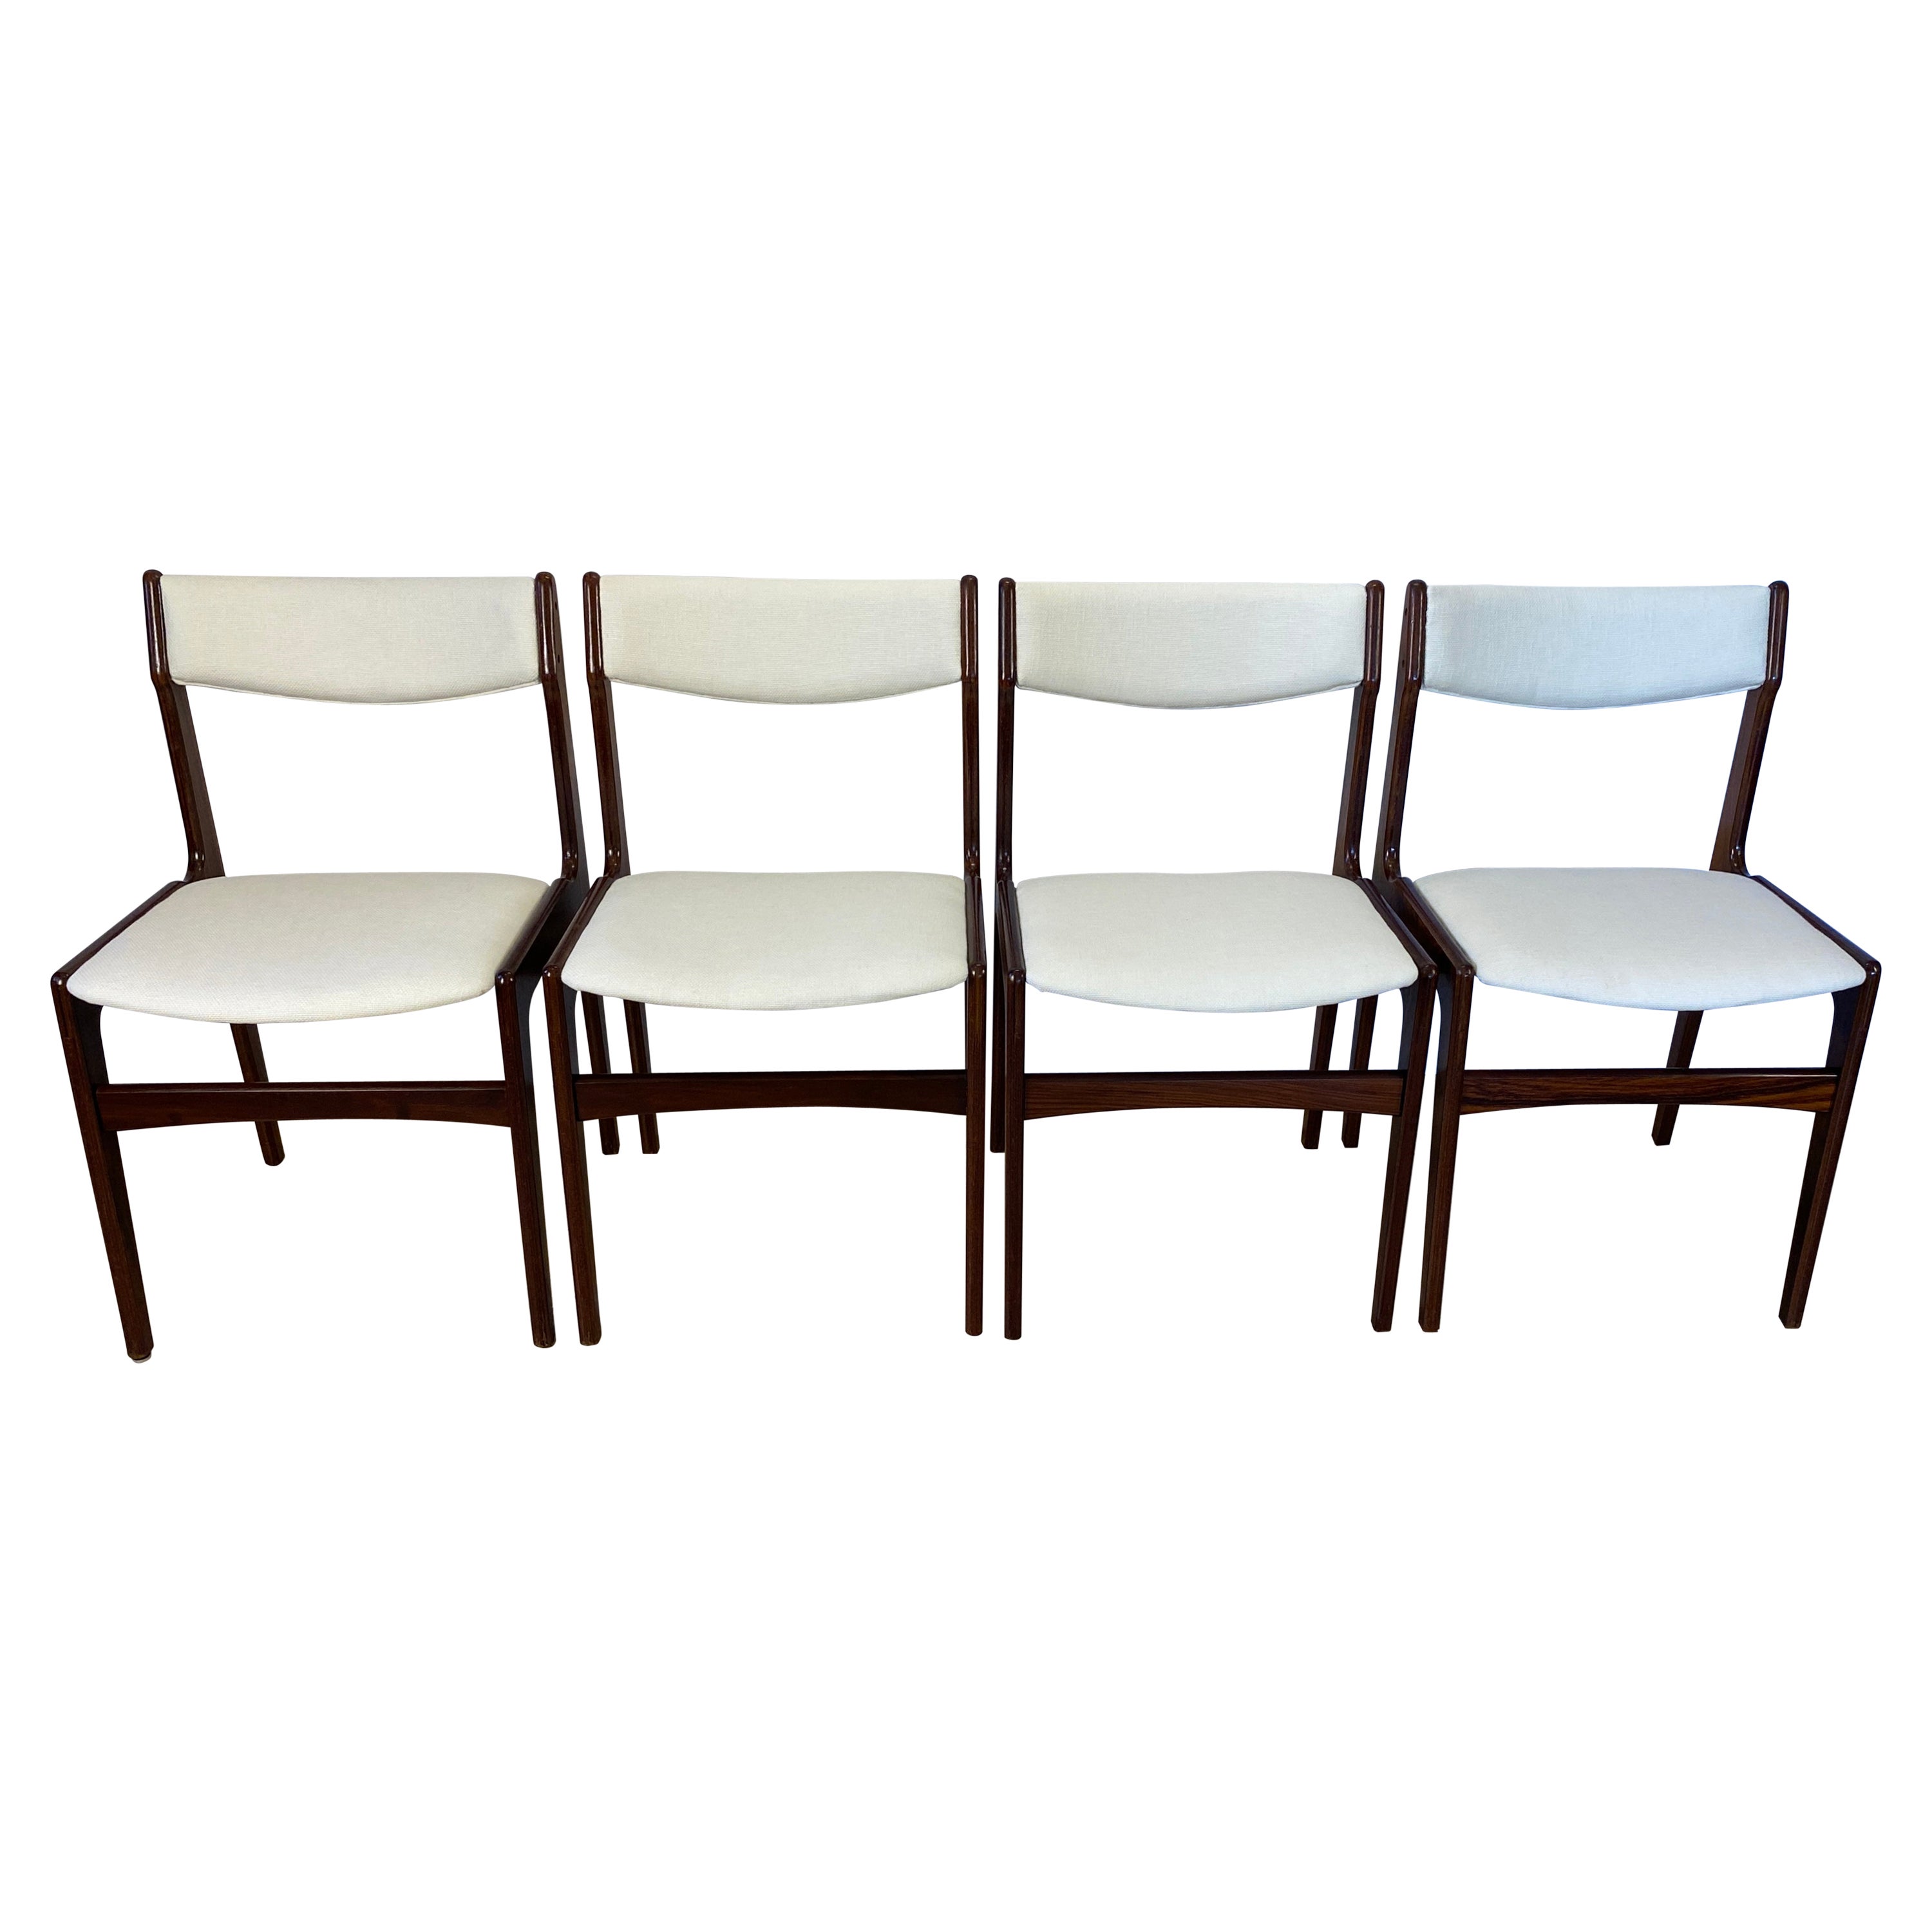 Set of 4 Mid-Century Modern Danish Dining Room Chairs  For Sale